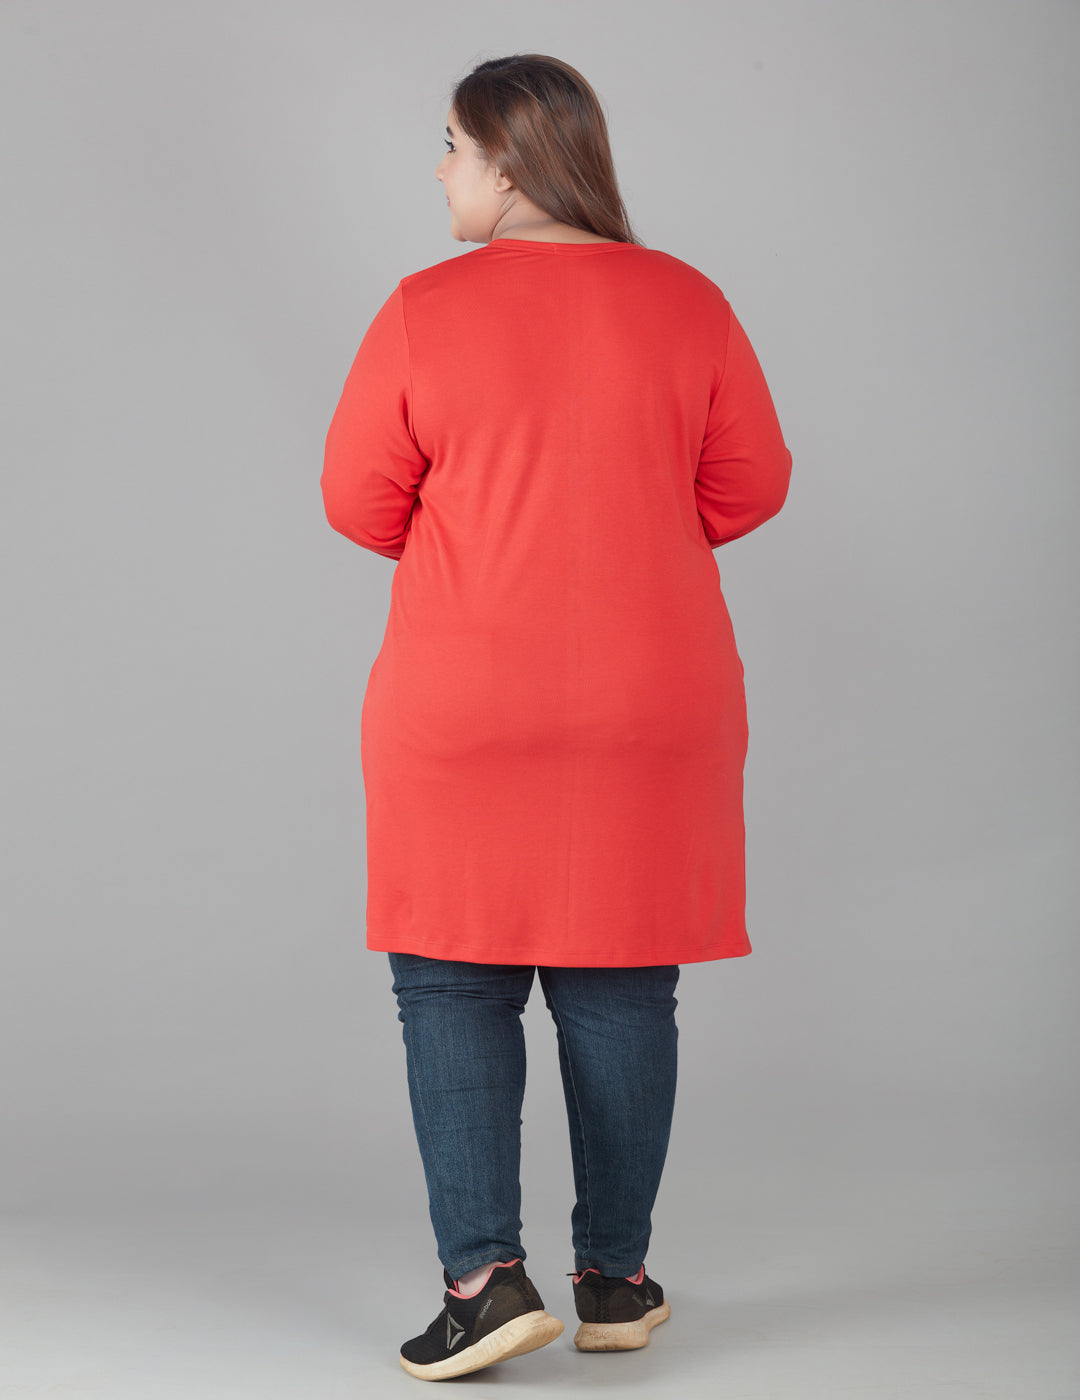 Full Sleeves Red Long Tops For Women in Pluz Size at best prices